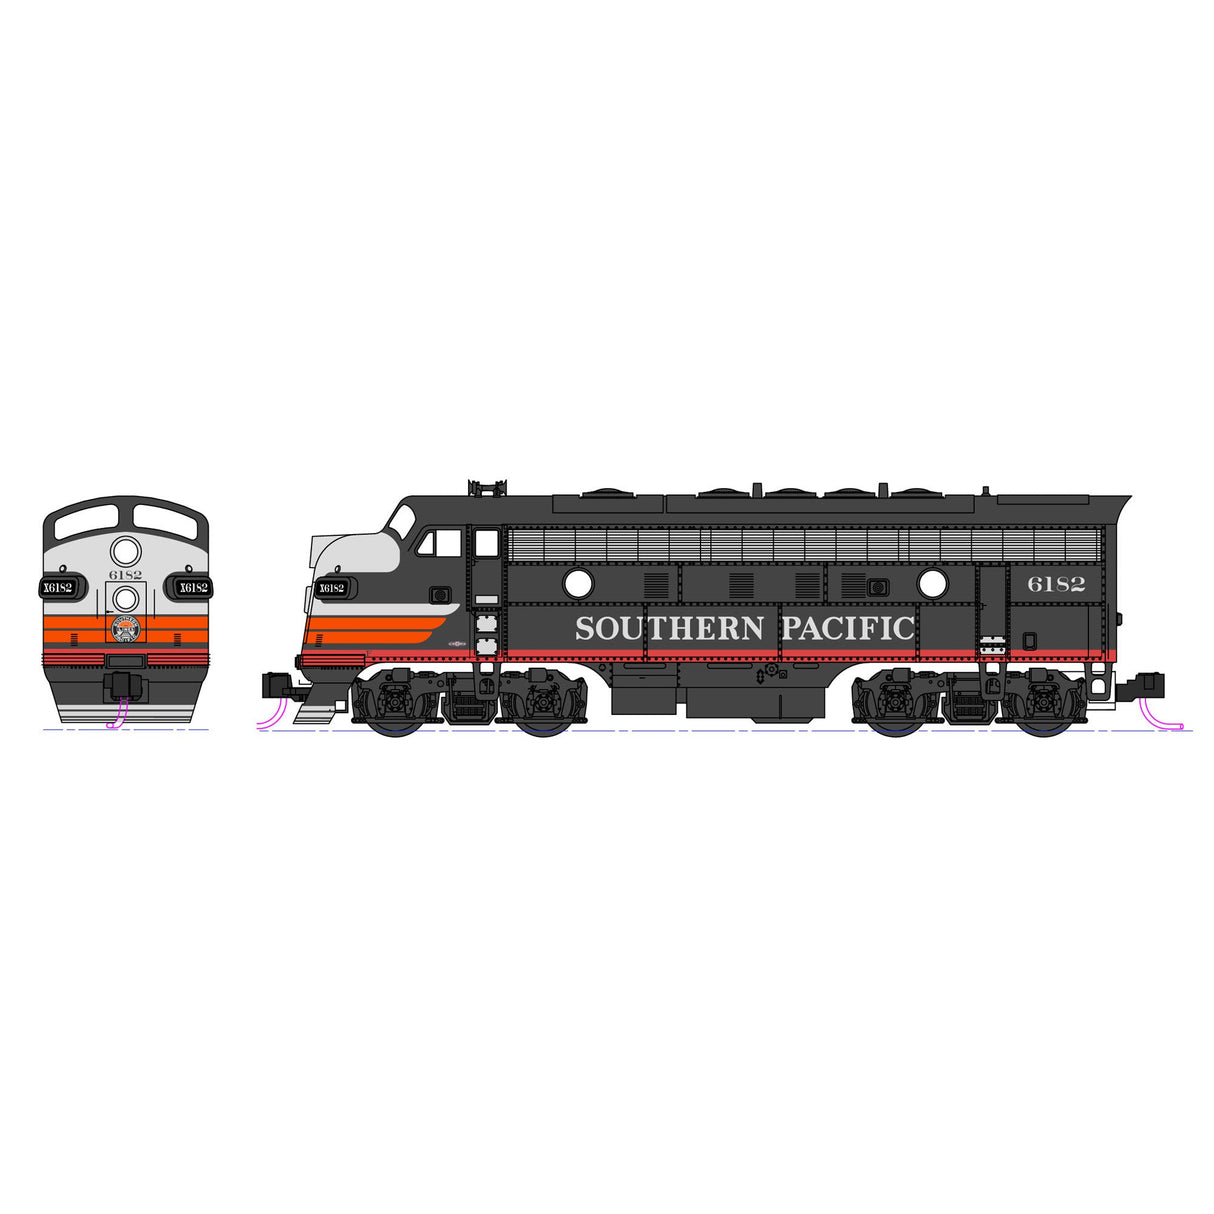 Kato N Scale F7 A/B Diesels SP #6282 & 8082 with Digitraxx DCC Decoders